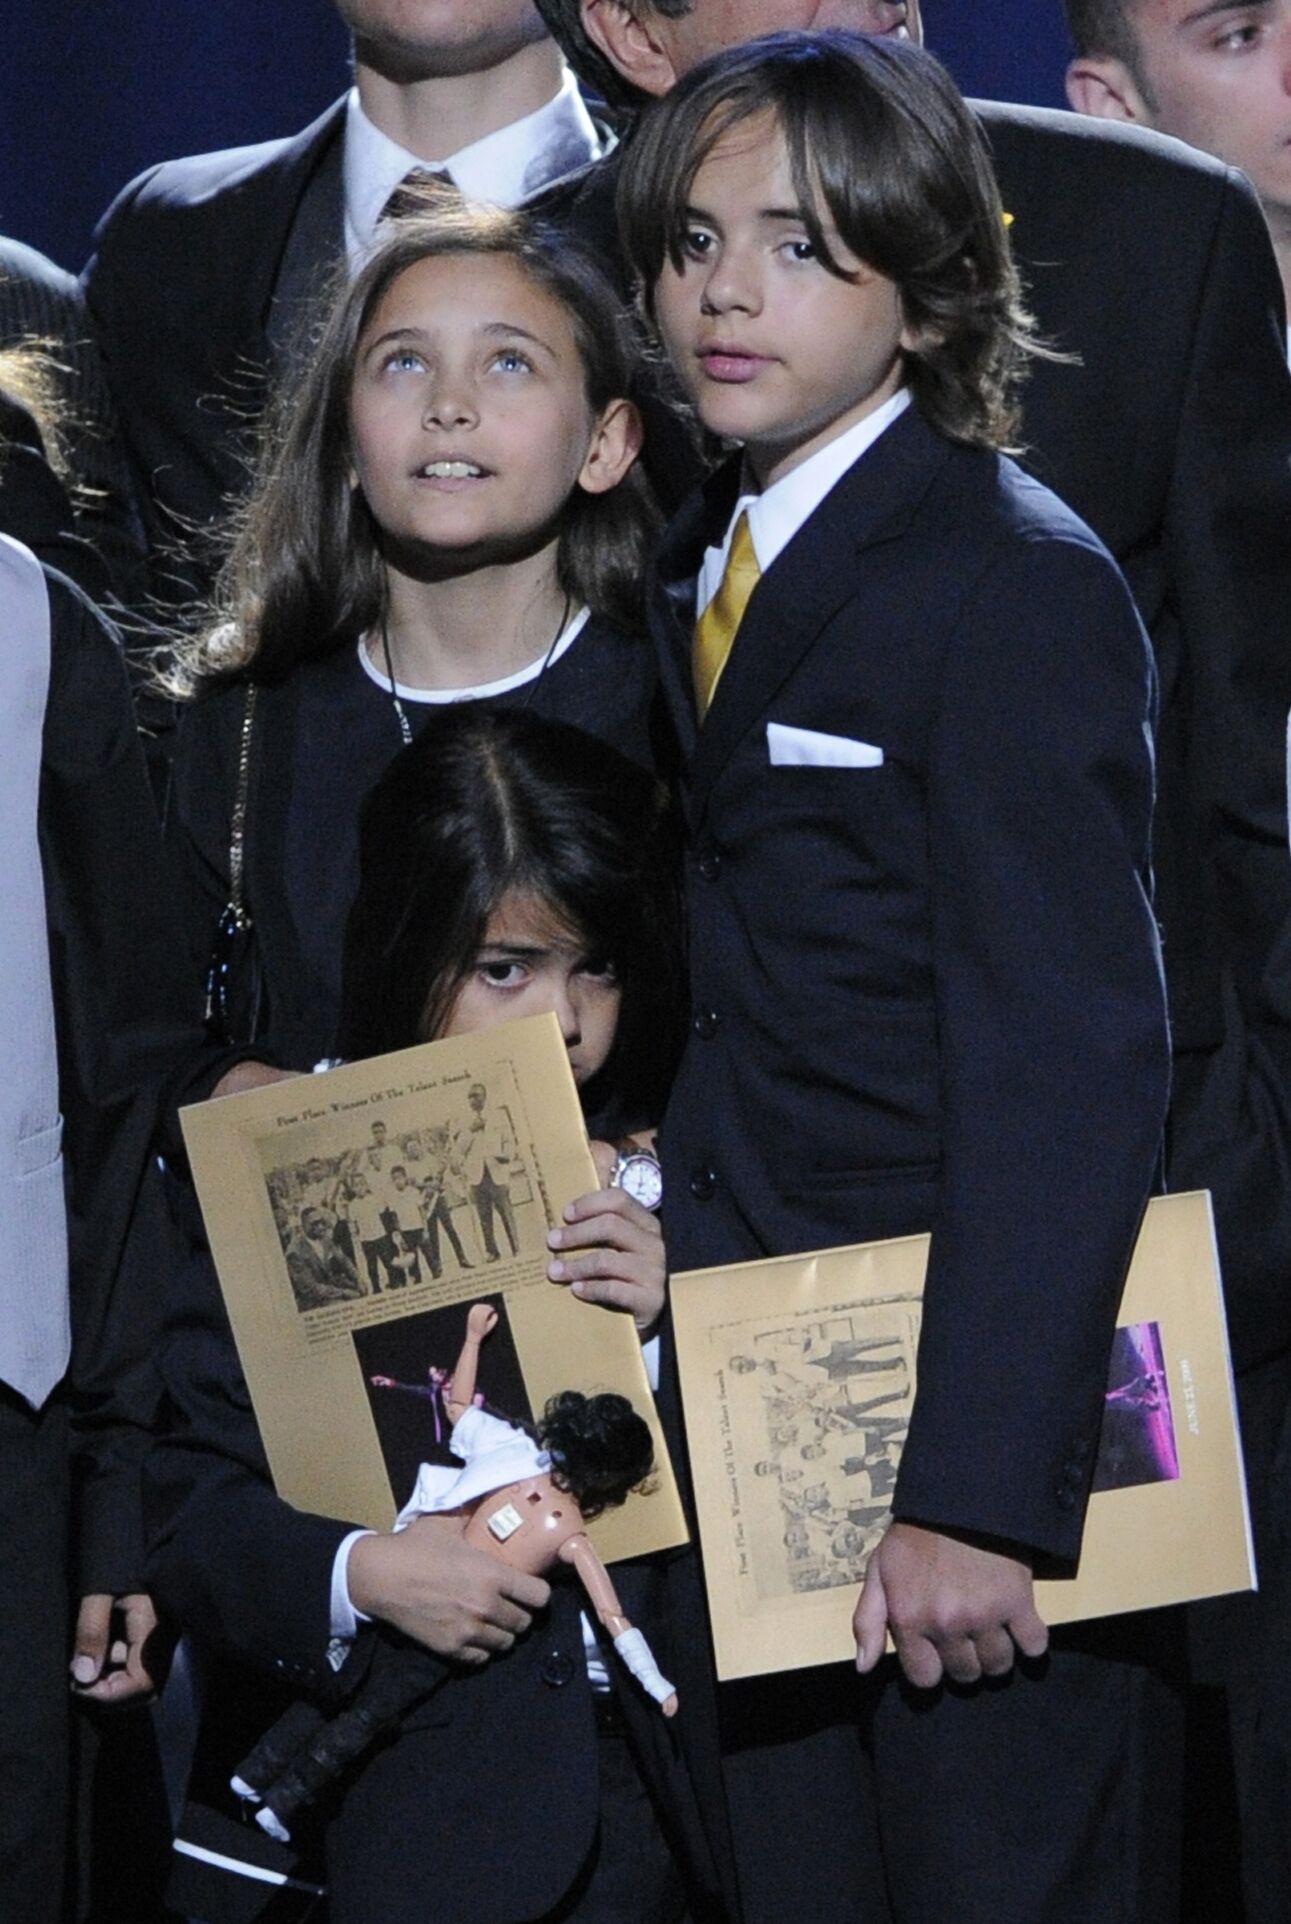 Paris Jackson, Prince Michael Jackson I and Prince Michael Jackson II onstage at the Michael Jackson public memorial service in July, 2009 | Source; Getty Images